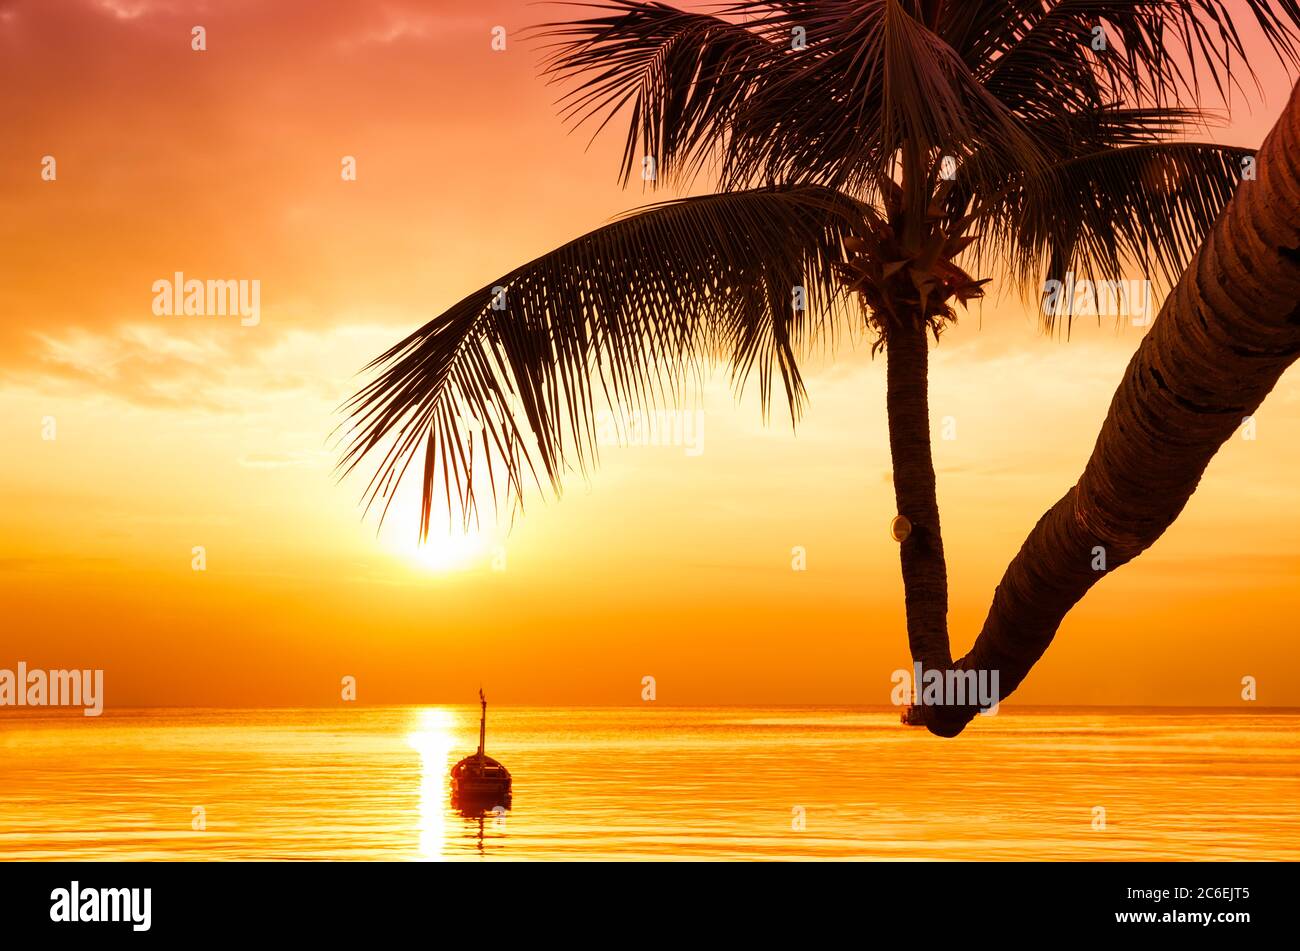 Coconut palm trees against colorful sunset. Dark silhouettes of palm trees and beautiful cloudy sky at tropical island. Stock Photo